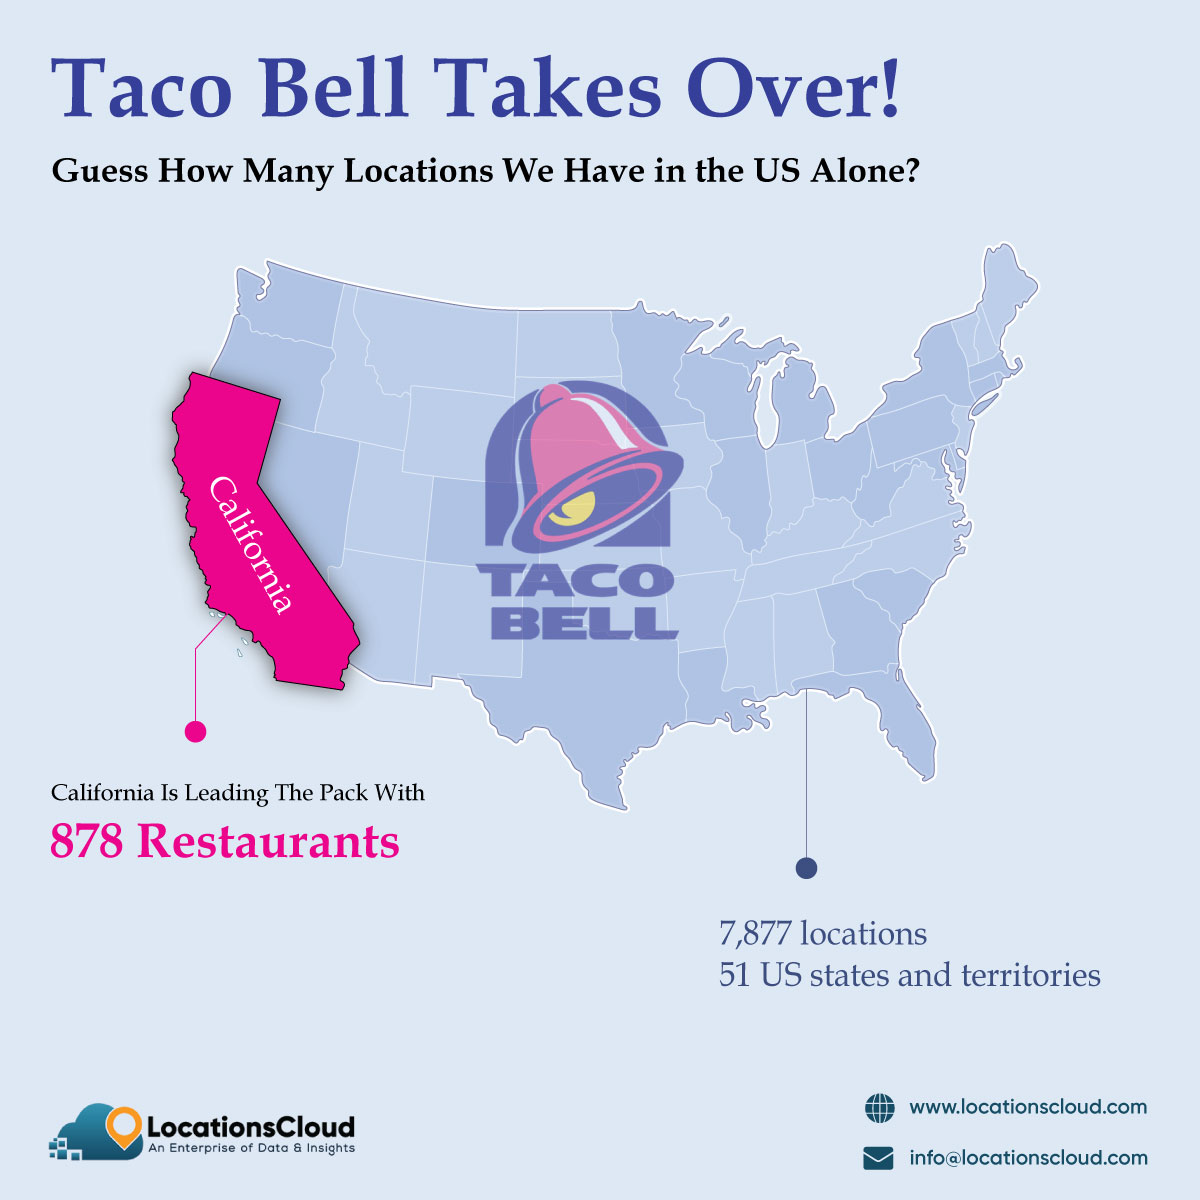 Taco Bell Takes Over! 🌮 Did you know we have a whopping 7,877 locations across the US? California leads with 878 restaurants! 📍

Check out our latest report to learn more about our nationwide presence. - locationscloud.com/intelligence-r…

#TacoBell #Locationdata #USA